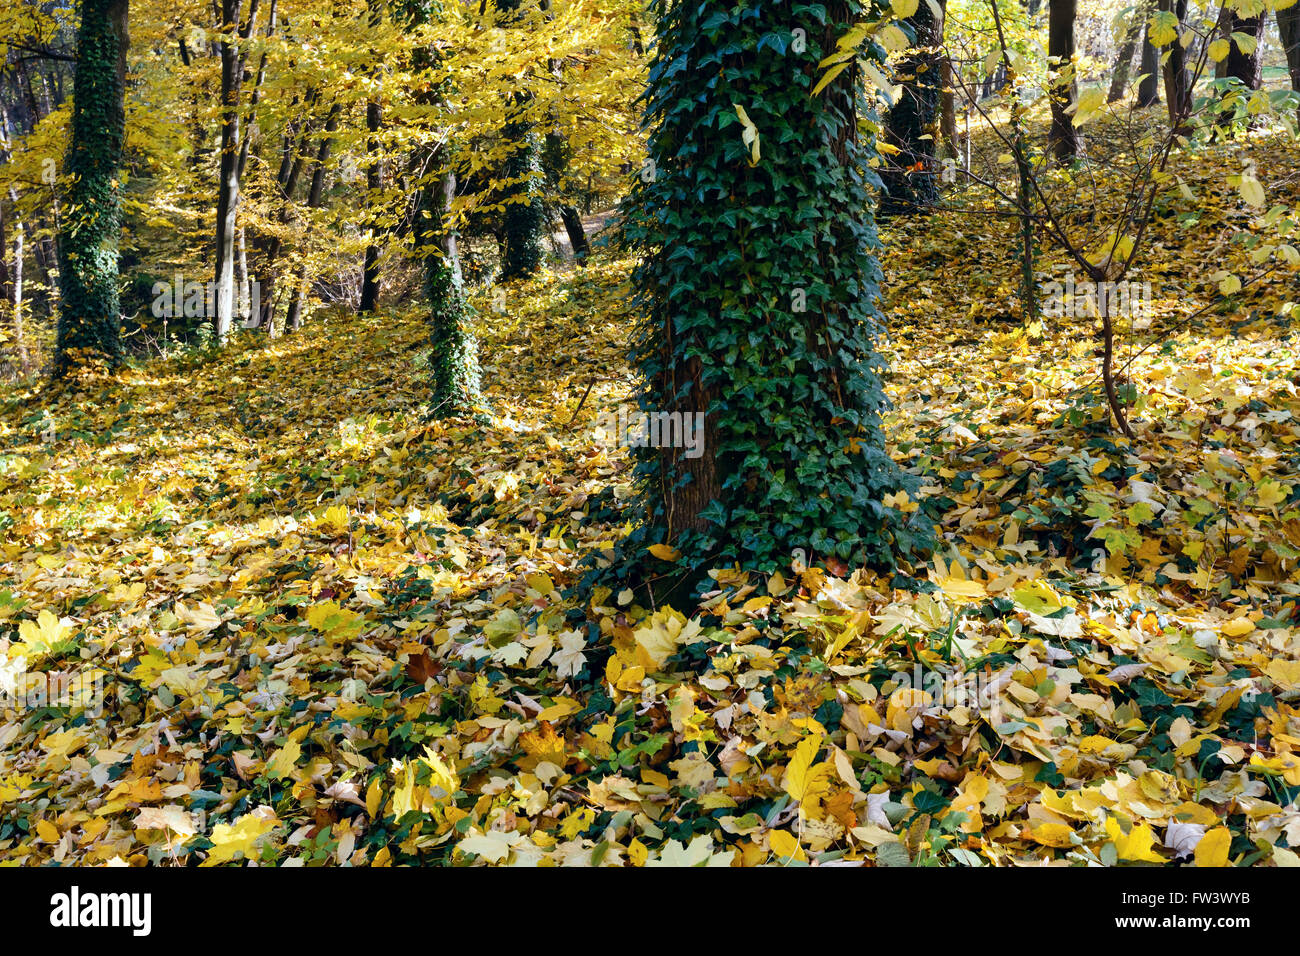 Green-yellow carpet of autumn leaves in forest. Stock Photo